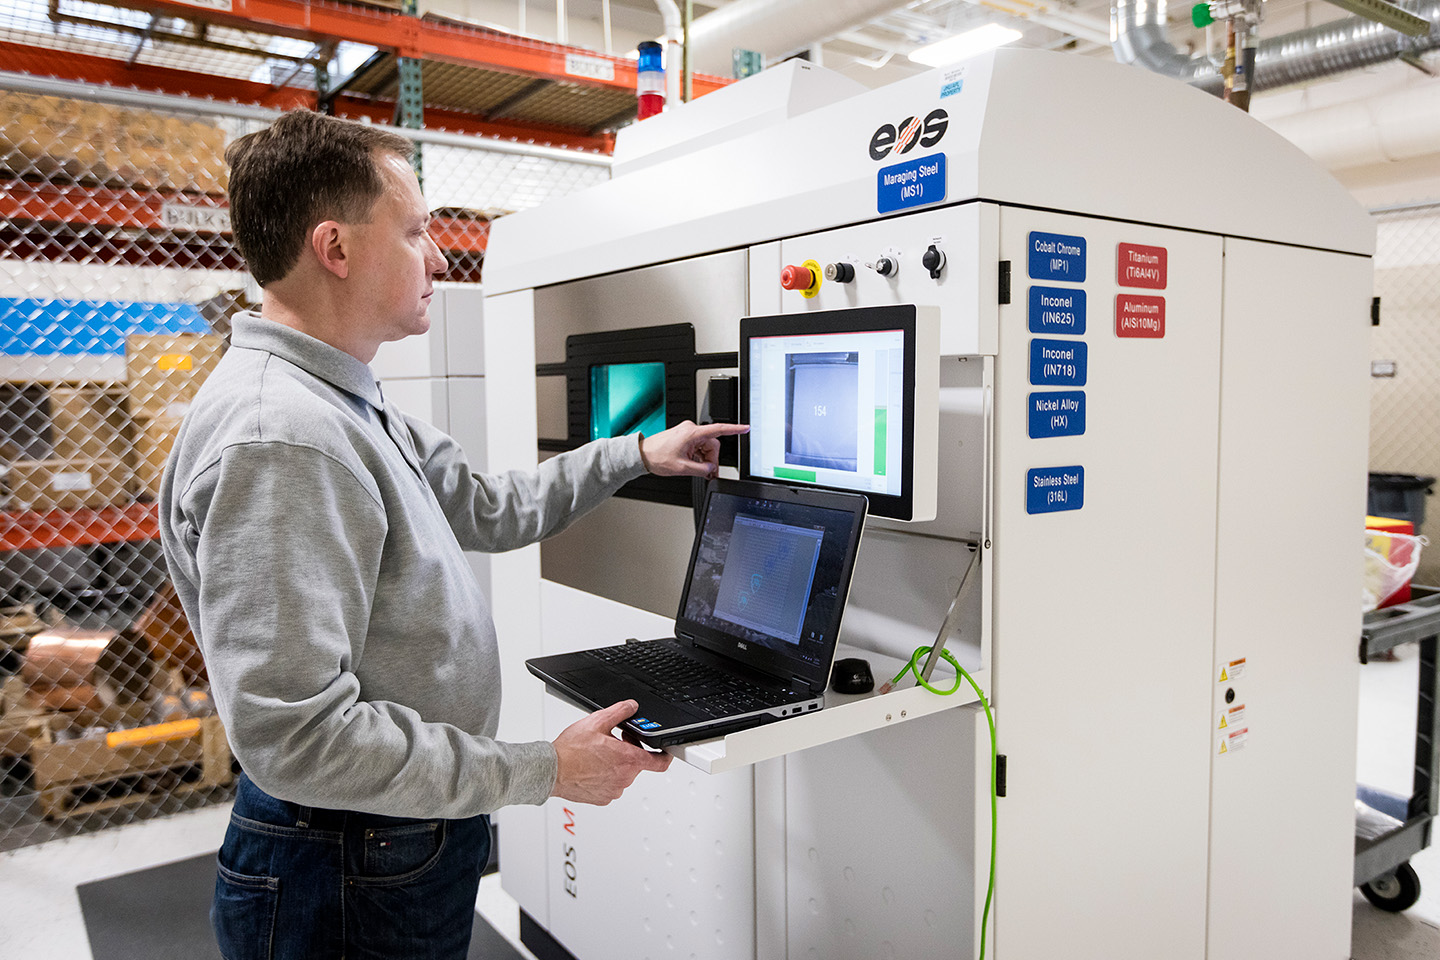 Additive Manufacturing Engineer John Slotwinski checks the progress of complex metal parts being fabricated inside APL's metal powder bed fusion additive manufacturing system.